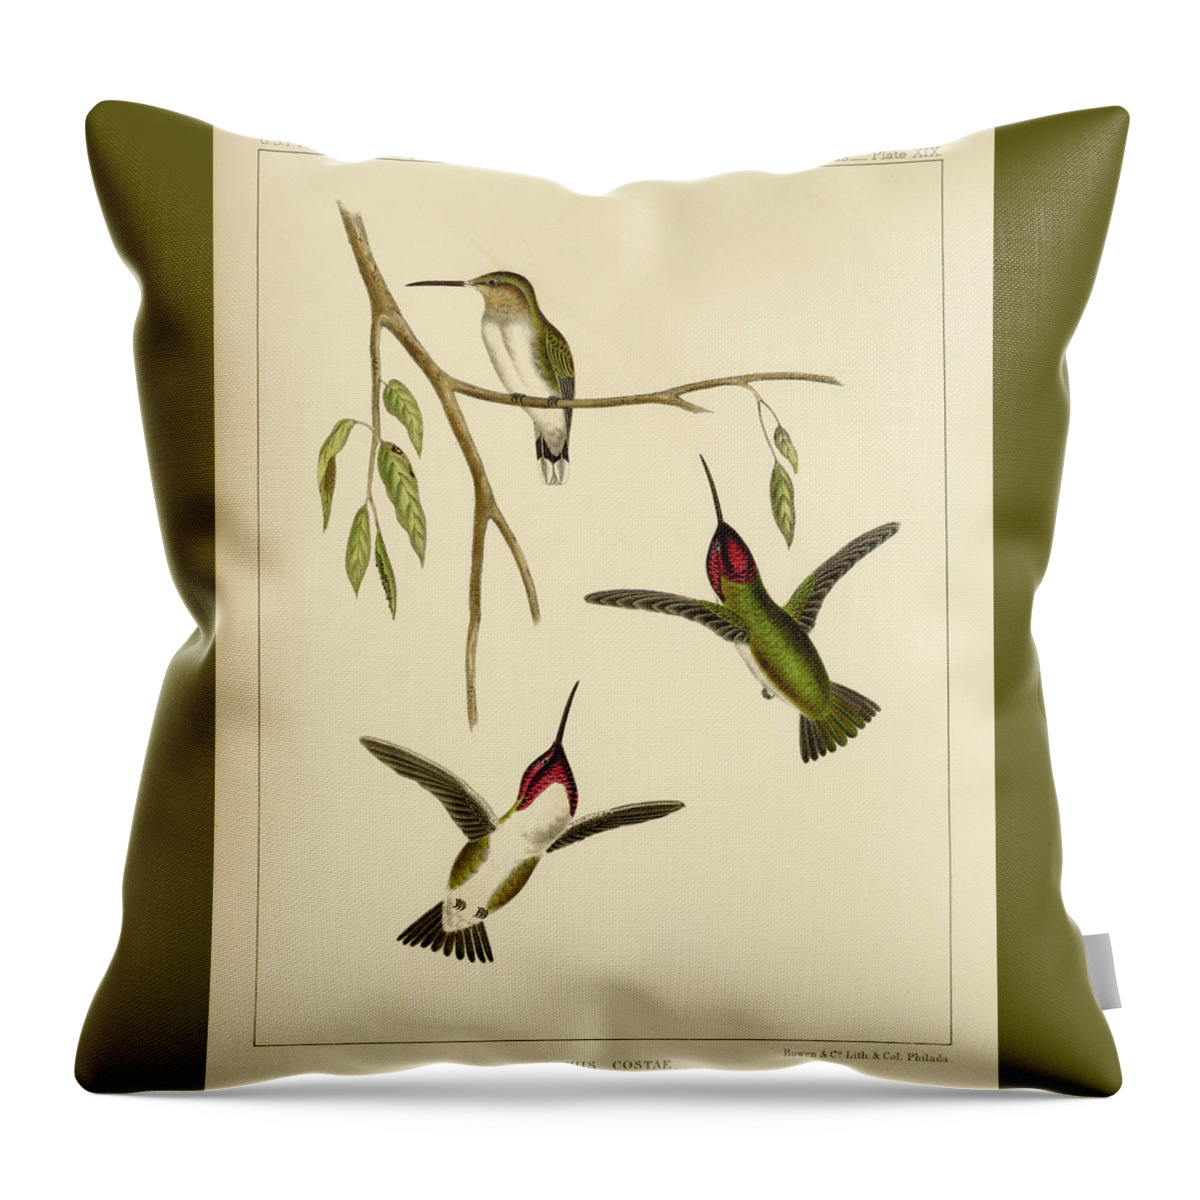 Birds Throw Pillow featuring the mixed media Atthis Costae by Bowen and Co lith and col Phila